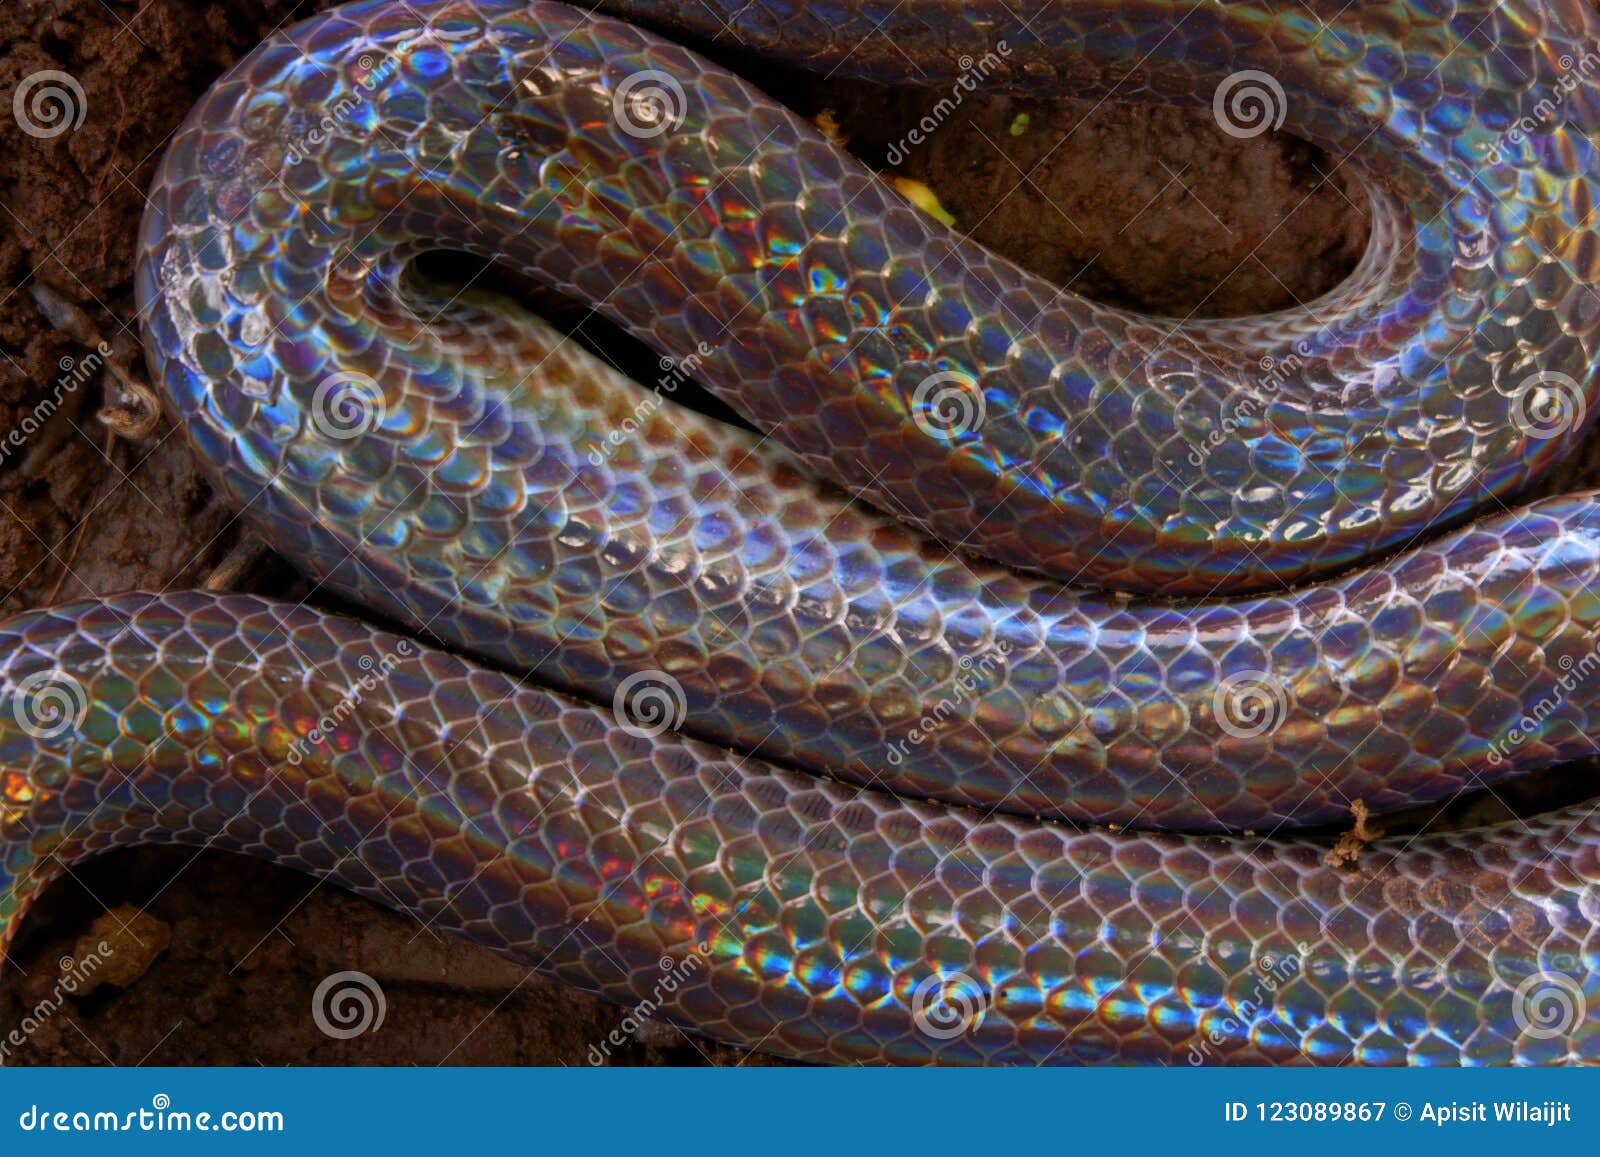 close up sunbeam snake in thailand and southeast asia.